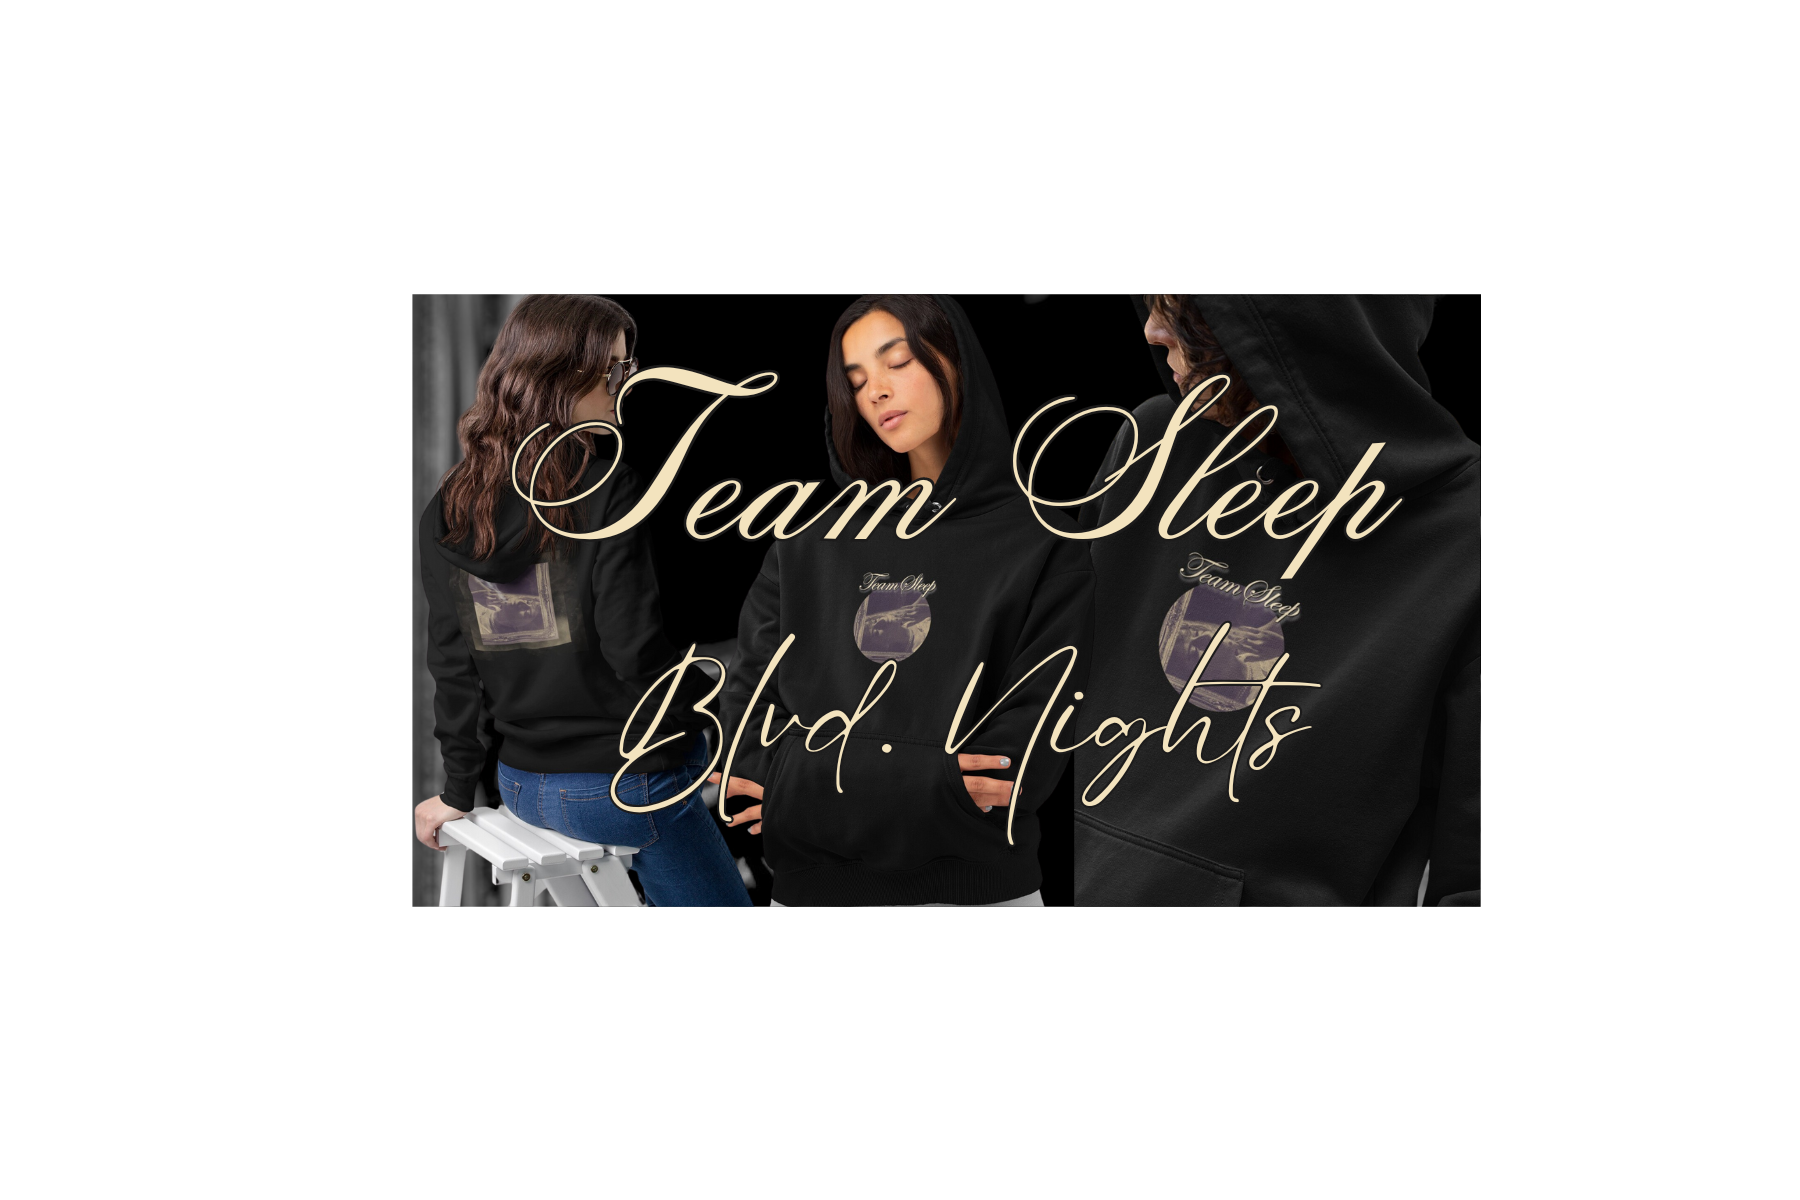 Ethereal Dreams: Team Sleep's Blvd. Nights Live- Video Tribute